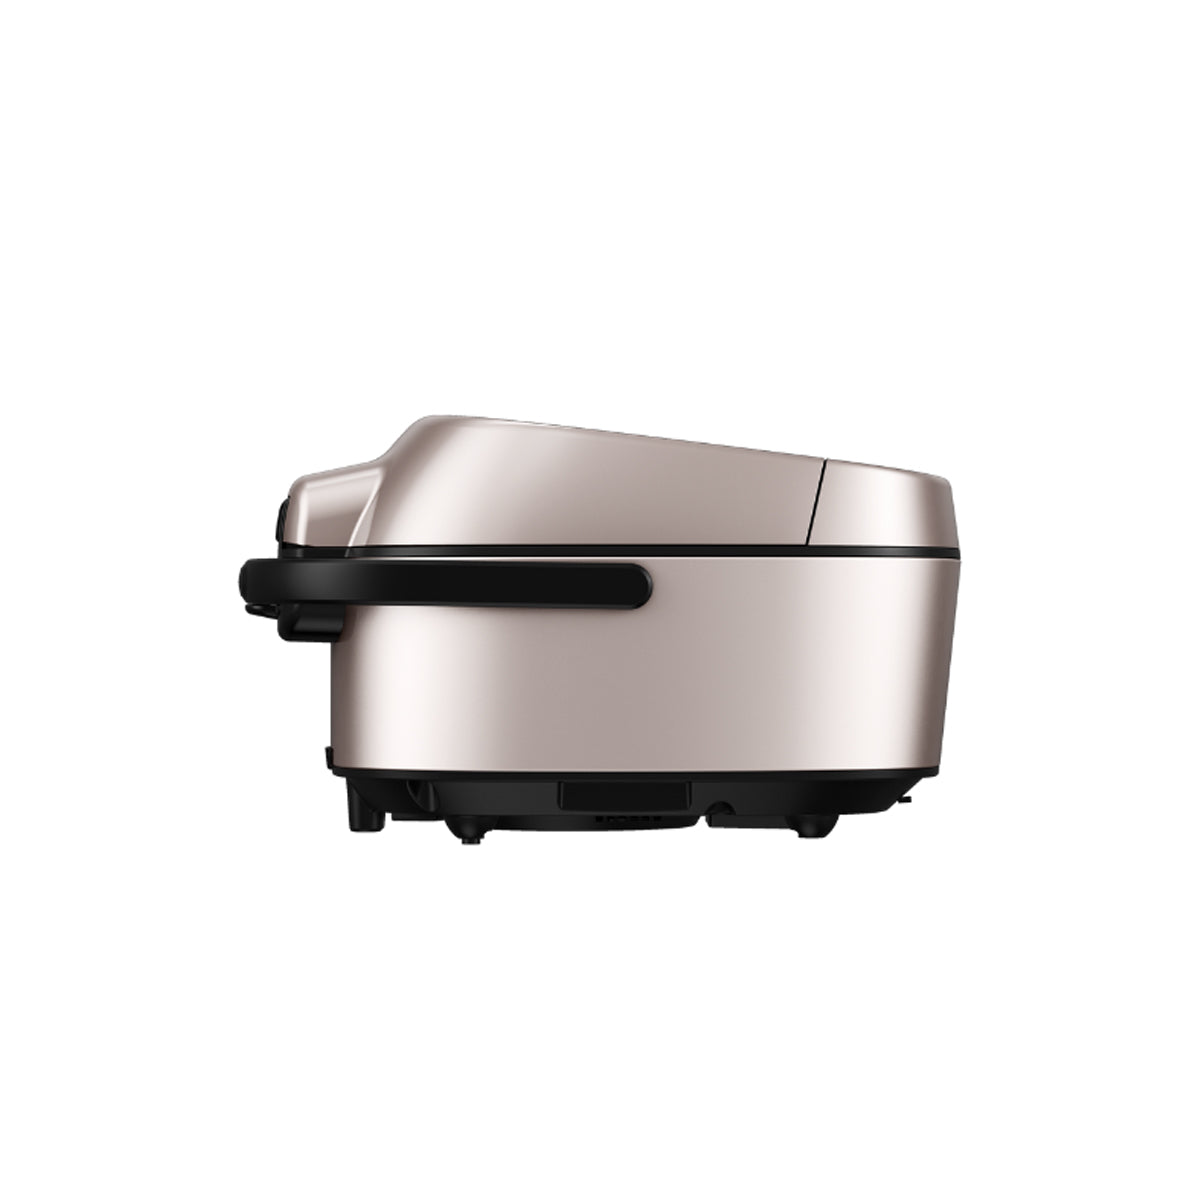 rice cooker multi function